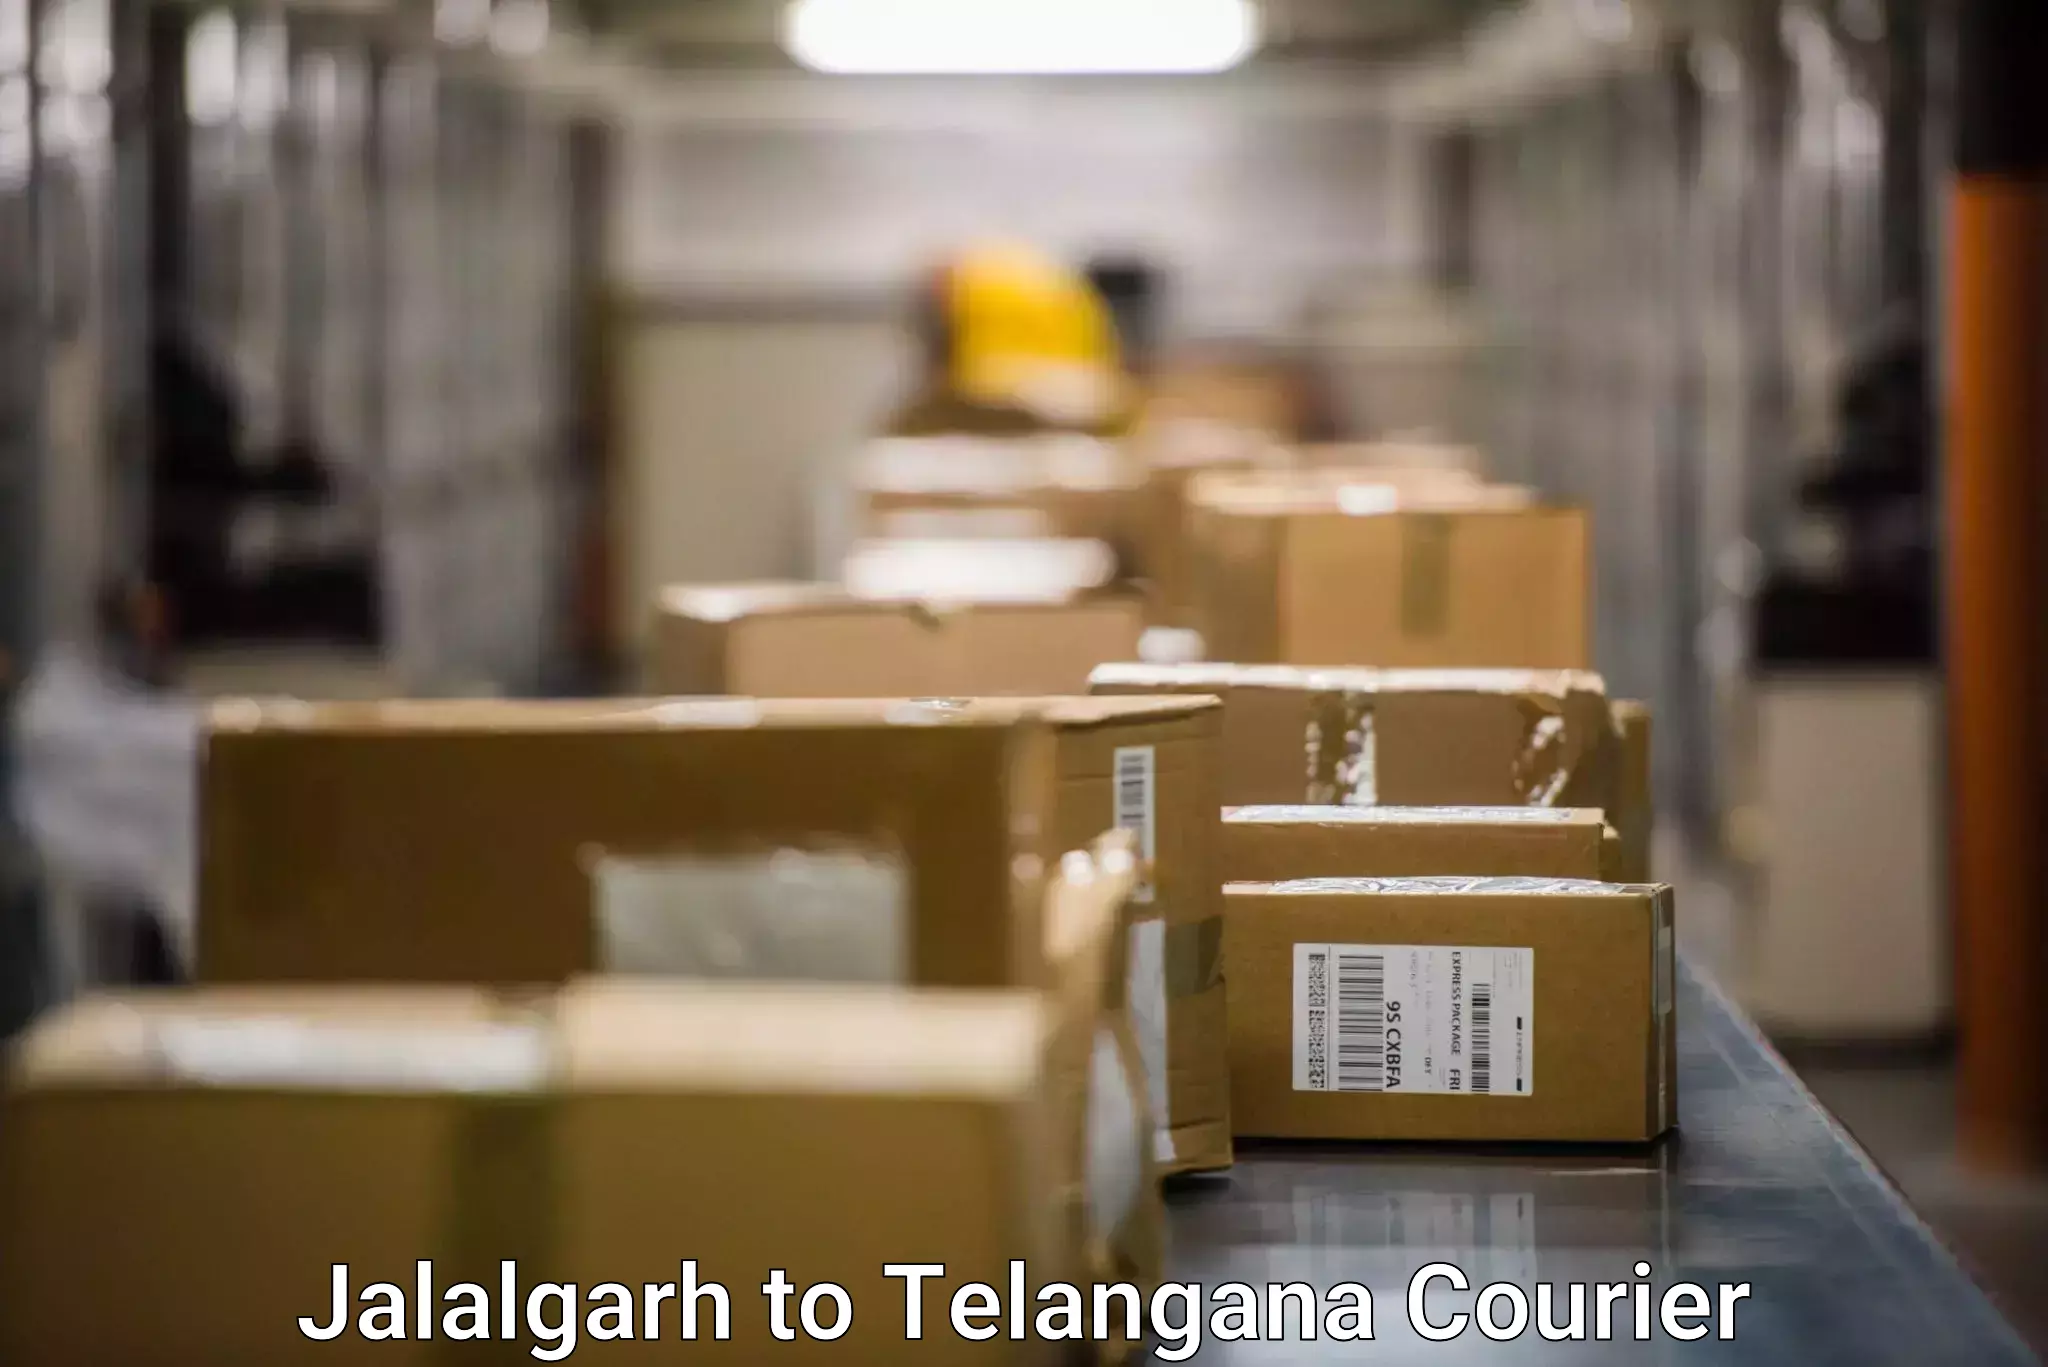 Flexible delivery schedules in Jalalgarh to Sathupally